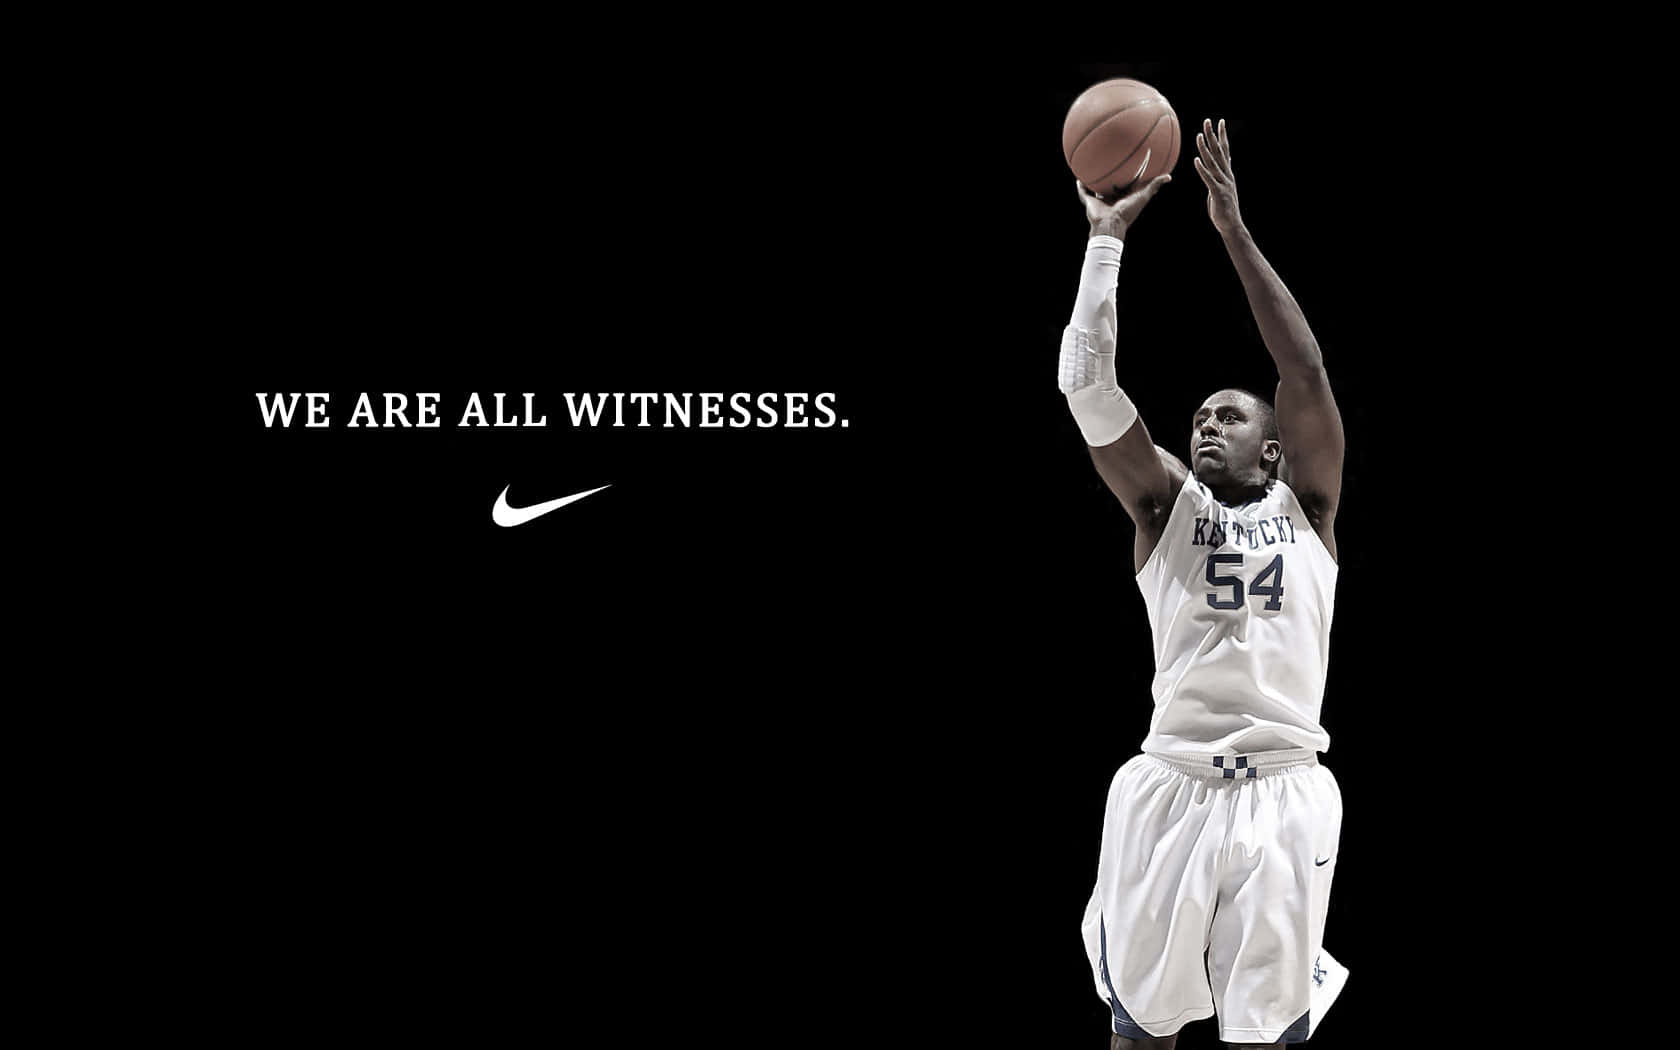 Nike Basketball Player With The Words We Are All Witnesses Wallpaper